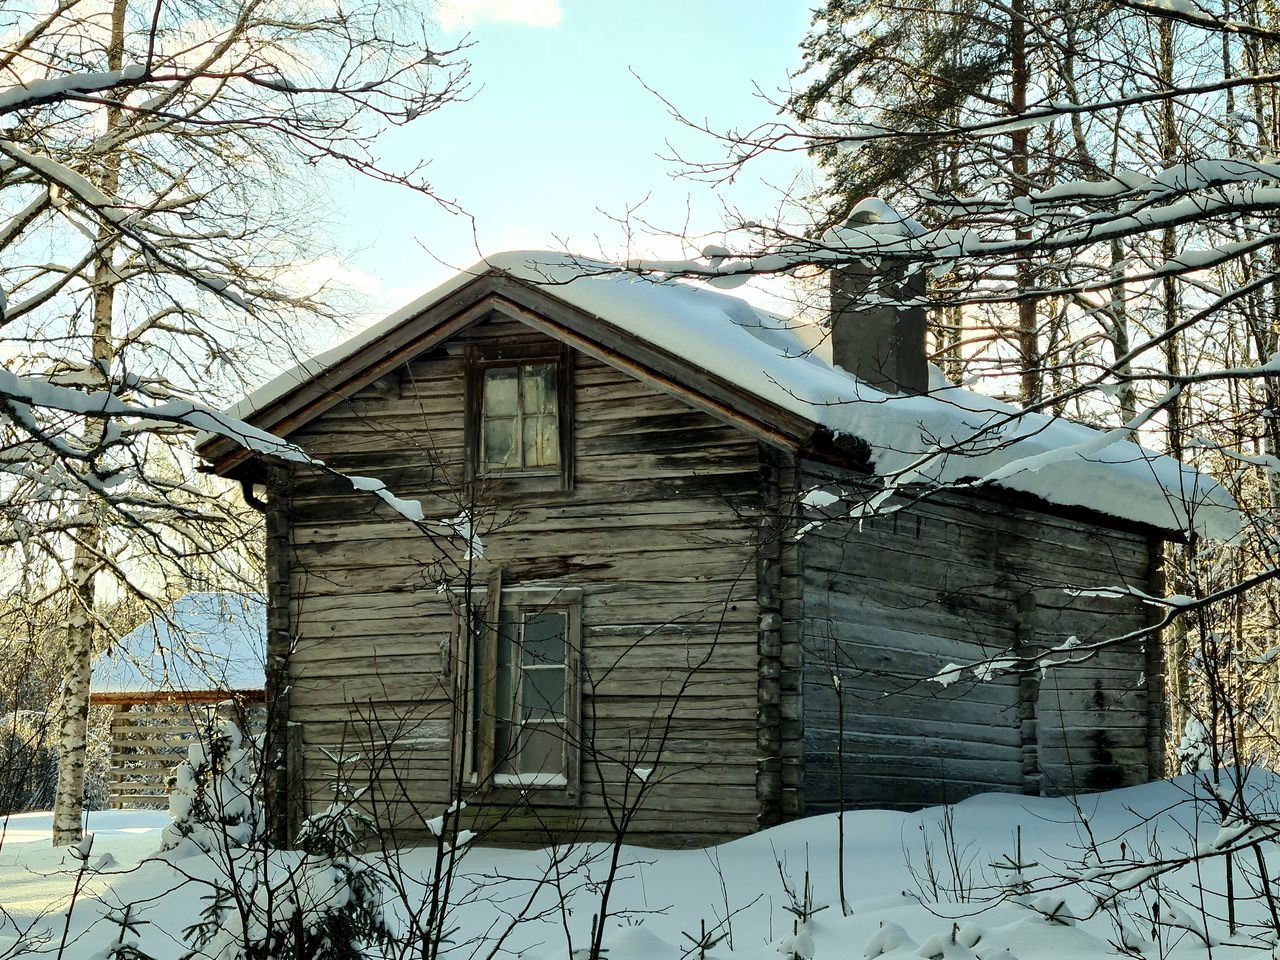 winter, built structure, architecture, building exterior, snow, tree, cold temperature, bare tree, building, plant, nature, house, home, no people, sugar house, day, sky, shack, wood, barn, rural area, outdoors, residential district, land, branch, frozen, landscape, log cabin, abandoned, cottage, non-urban scene